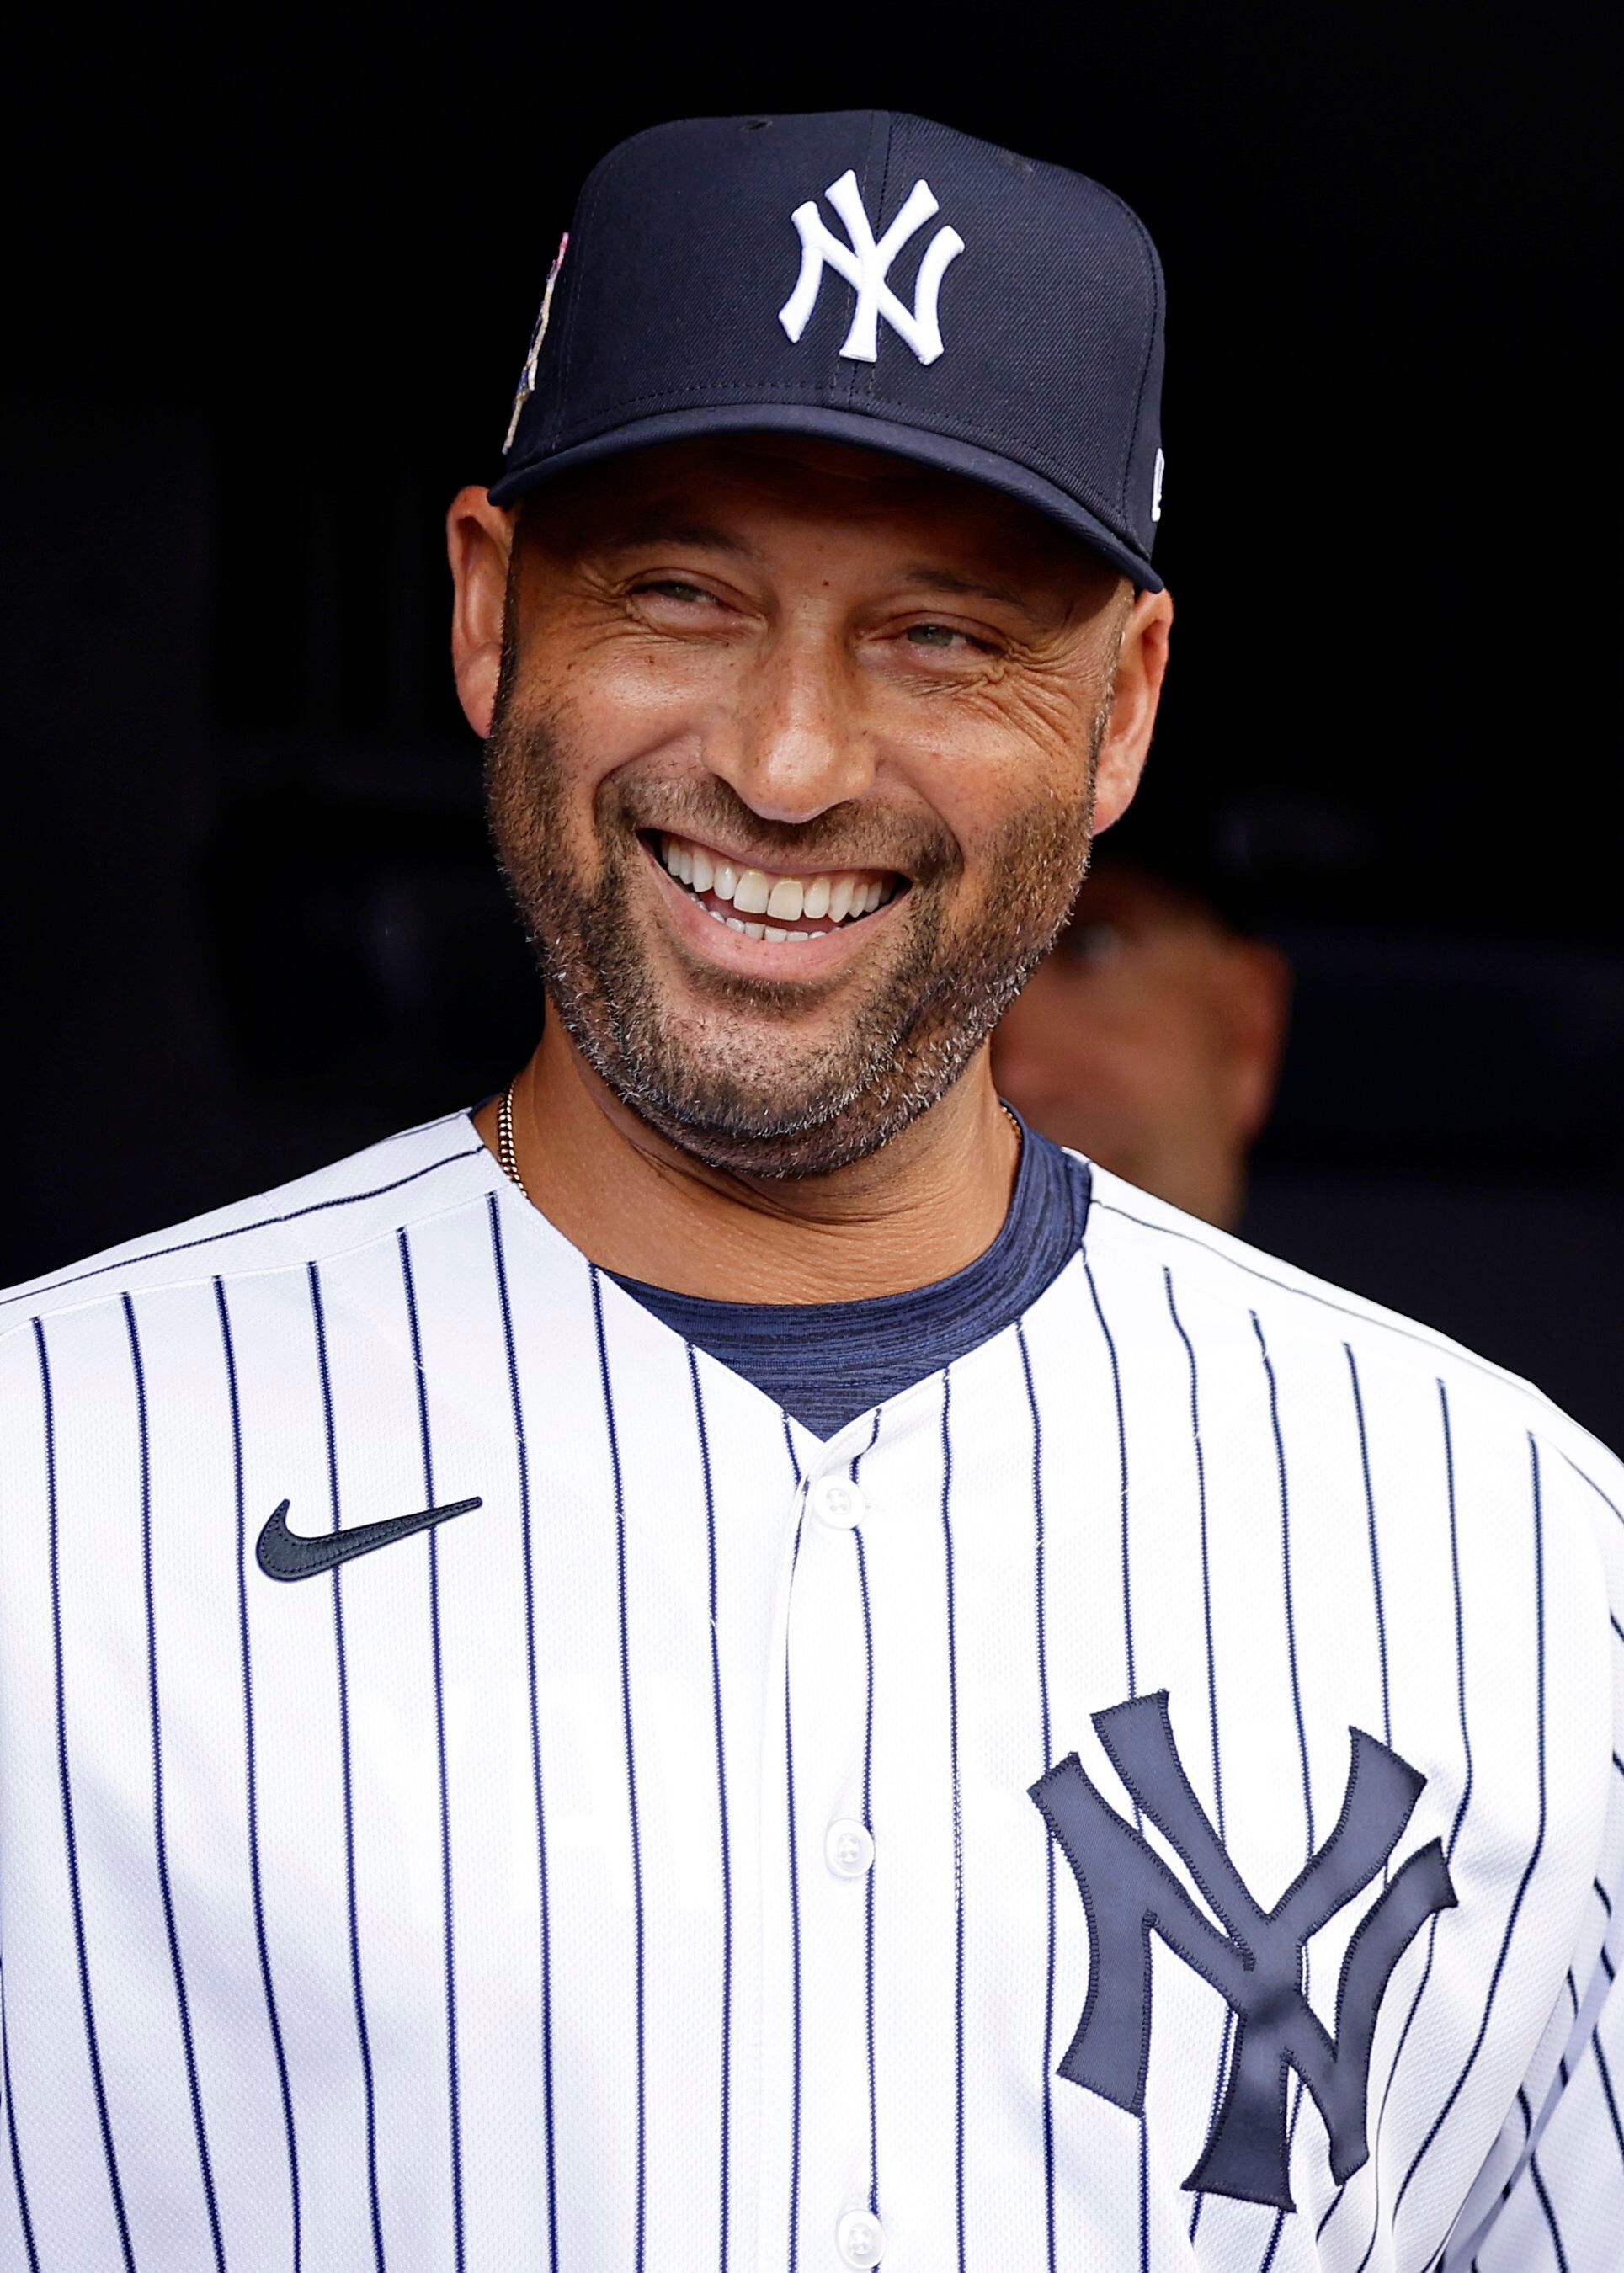 Derek Jeter returns to Yankee Stadium for first Old-Timers' Day